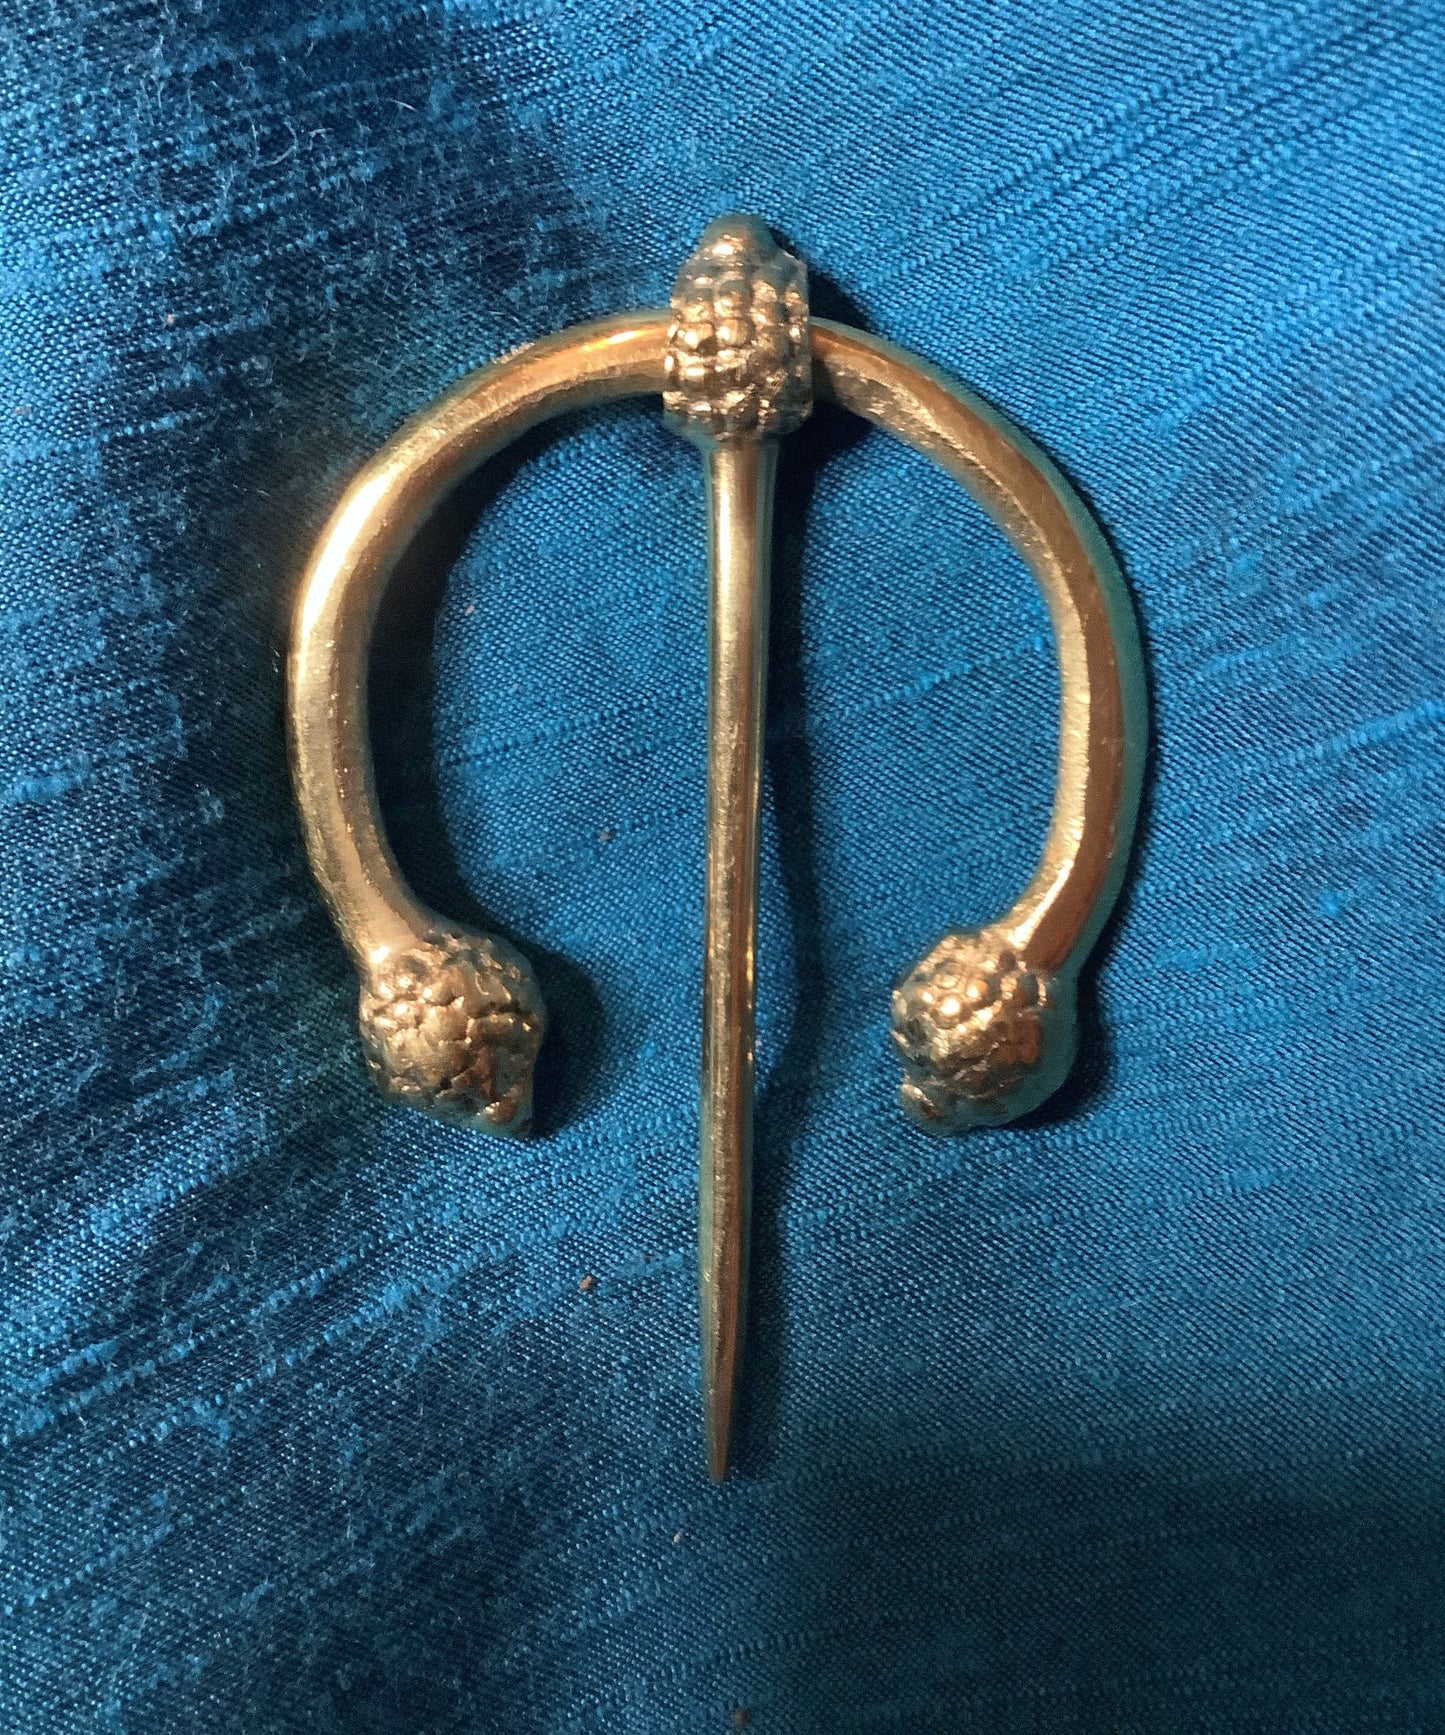 Penannular Brooch with Thistle Terminals